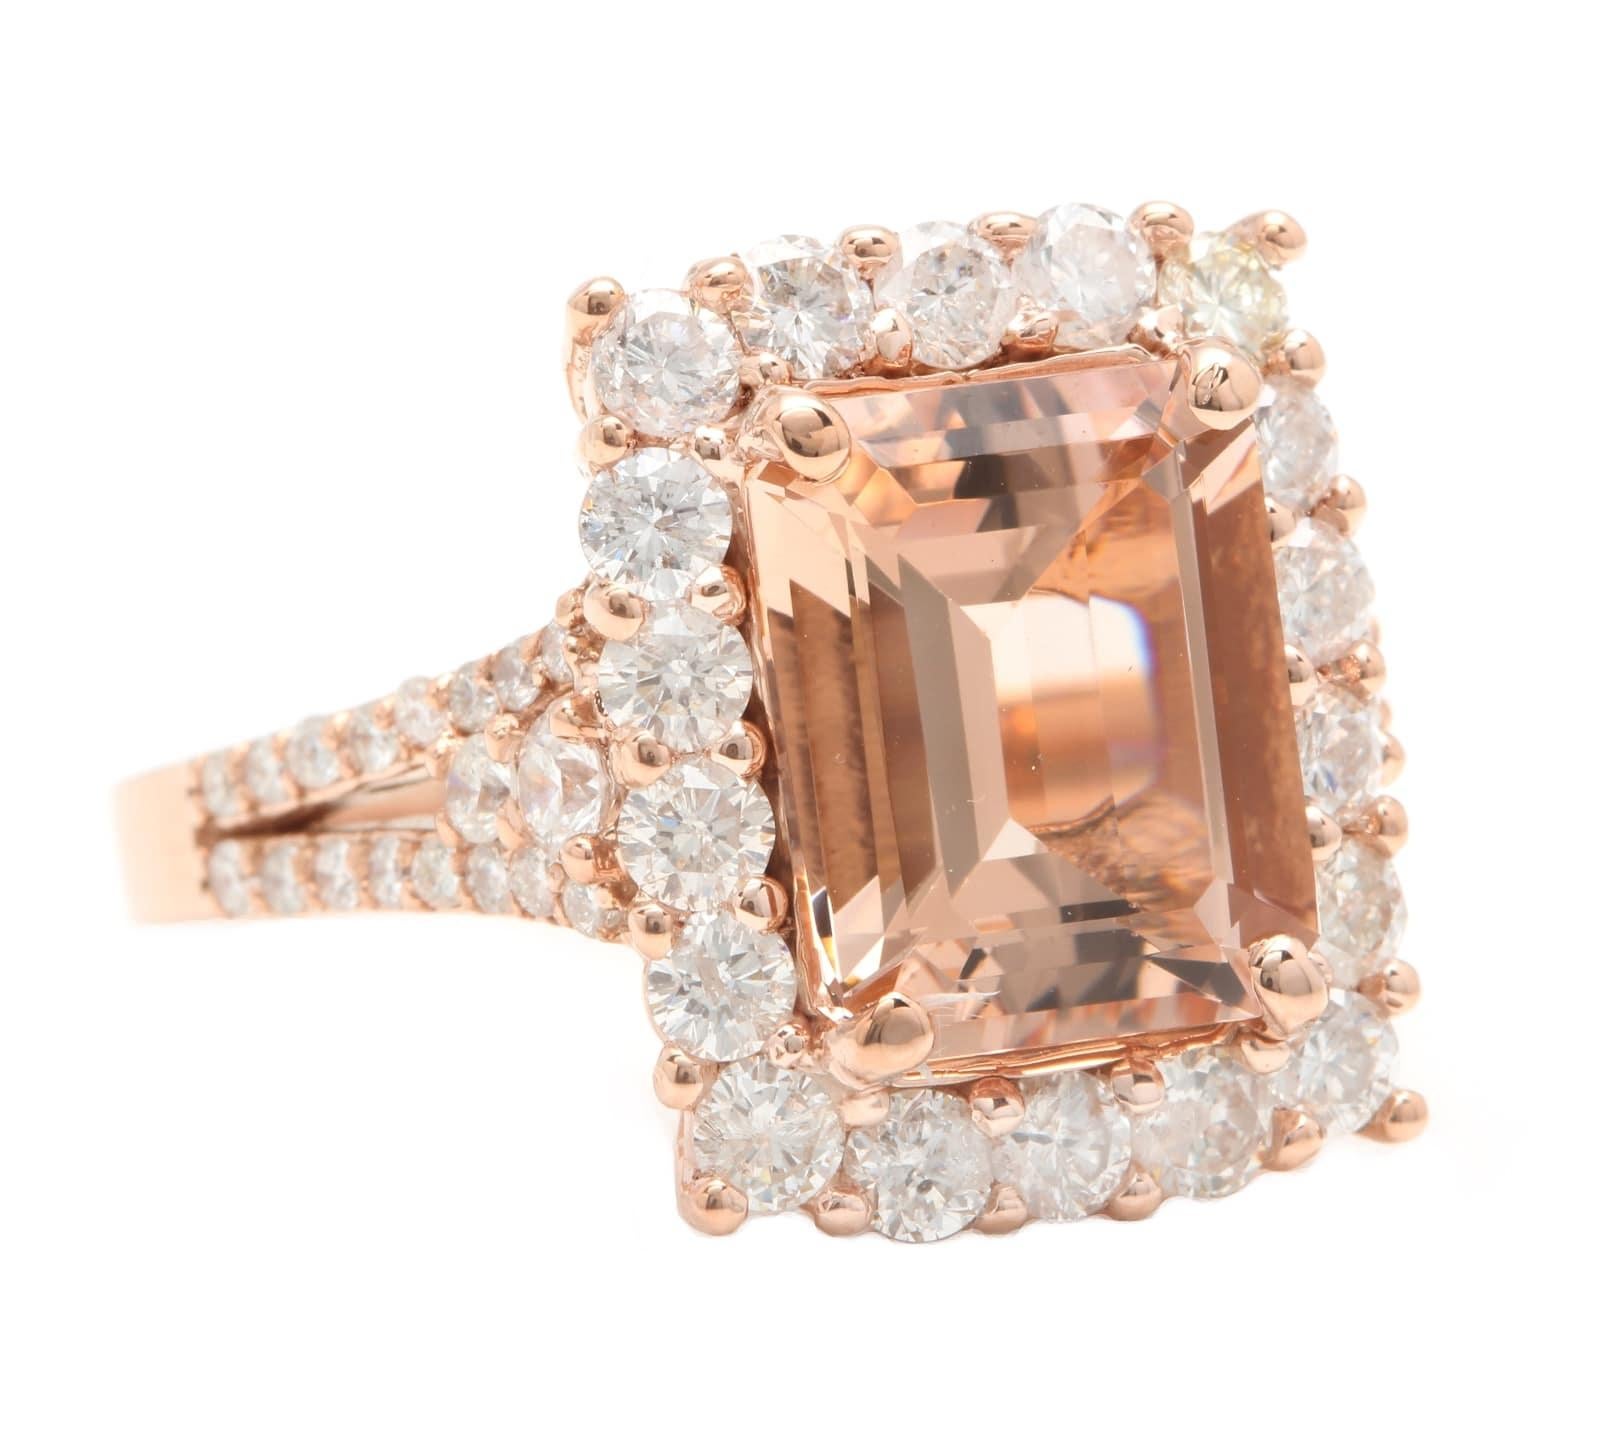 5.10 Carats Exquisite Natural Morganite and Diamond 14K Solid Rose Gold Ring

Suggested Replacement Value: $7,000.00

Total Natural Cushion Morganite Weights: Approx. 3.50 Carats

Morganite Measures: Approx. 11.00 x 9.00mm

Natural Round Diamonds